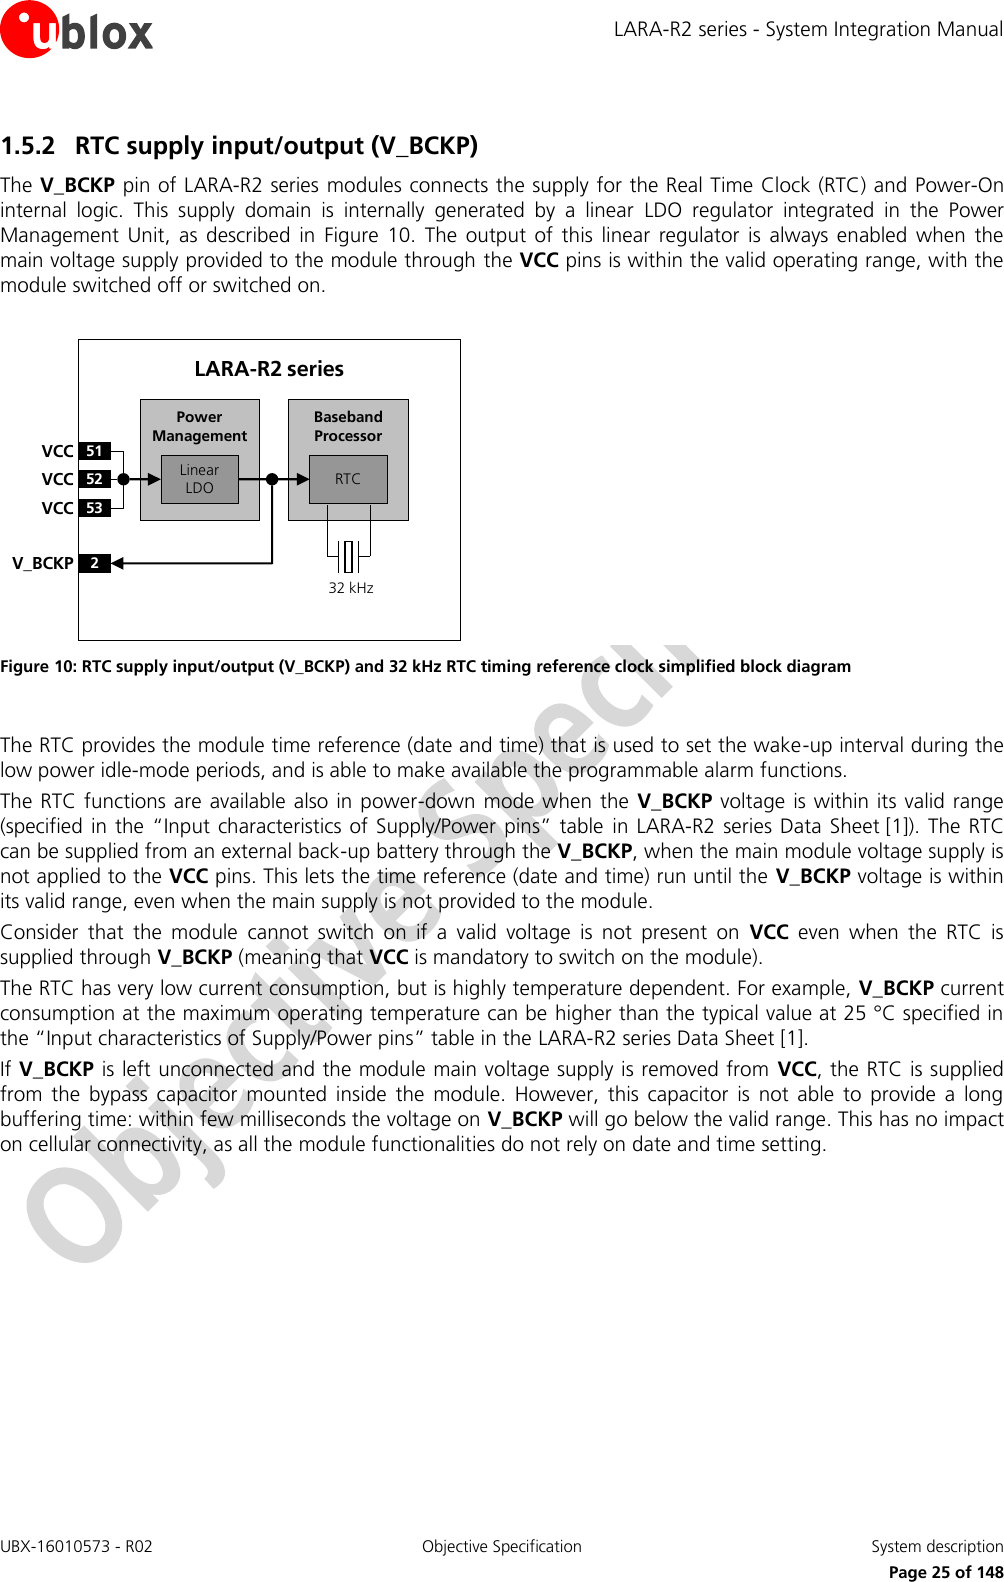 LARA-R2 series - System Integration Manual UBX-16010573 - R02  Objective Specification  System description     Page 25 of 148 1.5.2 RTC supply input/output (V_BCKP) The V_BCKP pin of LARA-R2 series modules connects the supply for the Real Time Clock (RTC) and Power-On internal  logic.  This  supply  domain  is  internally  generated  by  a  linear  LDO  regulator  integrated  in  the  Power Management  Unit,  as  described  in  Figure  10.  The  output  of  this  linear  regulator  is  always  enabled  when  the main voltage supply provided to the module through the VCC pins is within the valid operating range, with the module switched off or switched on.  Baseband Processor51VCC52VCC53VCC2V_BCKPLinear LDO RTCPower ManagementLARA-R2 series32 kHz Figure 10: RTC supply input/output (V_BCKP) and 32 kHz RTC timing reference clock simplified block diagram  The RTC provides the module time reference (date and time) that is used to set the wake-up interval during the low power idle-mode periods, and is able to make available the programmable alarm functions. The RTC functions are  available also in  power-down mode when the  V_BCKP voltage is within its valid range (specified in the “Input  characteristics of  Supply/Power  pins”  table  in LARA-R2  series Data  Sheet [1]).  The RTC can be supplied from an external back-up battery through the V_BCKP, when the main module voltage supply is not applied to the VCC pins. This lets the time reference (date and time) run until the V_BCKP voltage is within its valid range, even when the main supply is not provided to the module. Consider  that  the  module  cannot  switch  on  if  a  valid  voltage  is  not  present  on  VCC  even  when  the  RTC  is supplied through V_BCKP (meaning that VCC is mandatory to switch on the module). The RTC has very low current consumption, but is highly temperature dependent. For example, V_BCKP current consumption at the maximum operating temperature can be higher than the typical value at 25 °C specified in the “Input characteristics of Supply/Power pins” table in the LARA-R2 series Data Sheet [1]. If V_BCKP is left unconnected and the module main voltage supply is removed from  VCC, the RTC is supplied from  the  bypass  capacitor  mounted  inside  the  module.  However,  this  capacitor  is  not  able  to  provide  a  long buffering time: within few milliseconds the voltage on V_BCKP will go below the valid range. This has no impact on cellular connectivity, as all the module functionalities do not rely on date and time setting.  